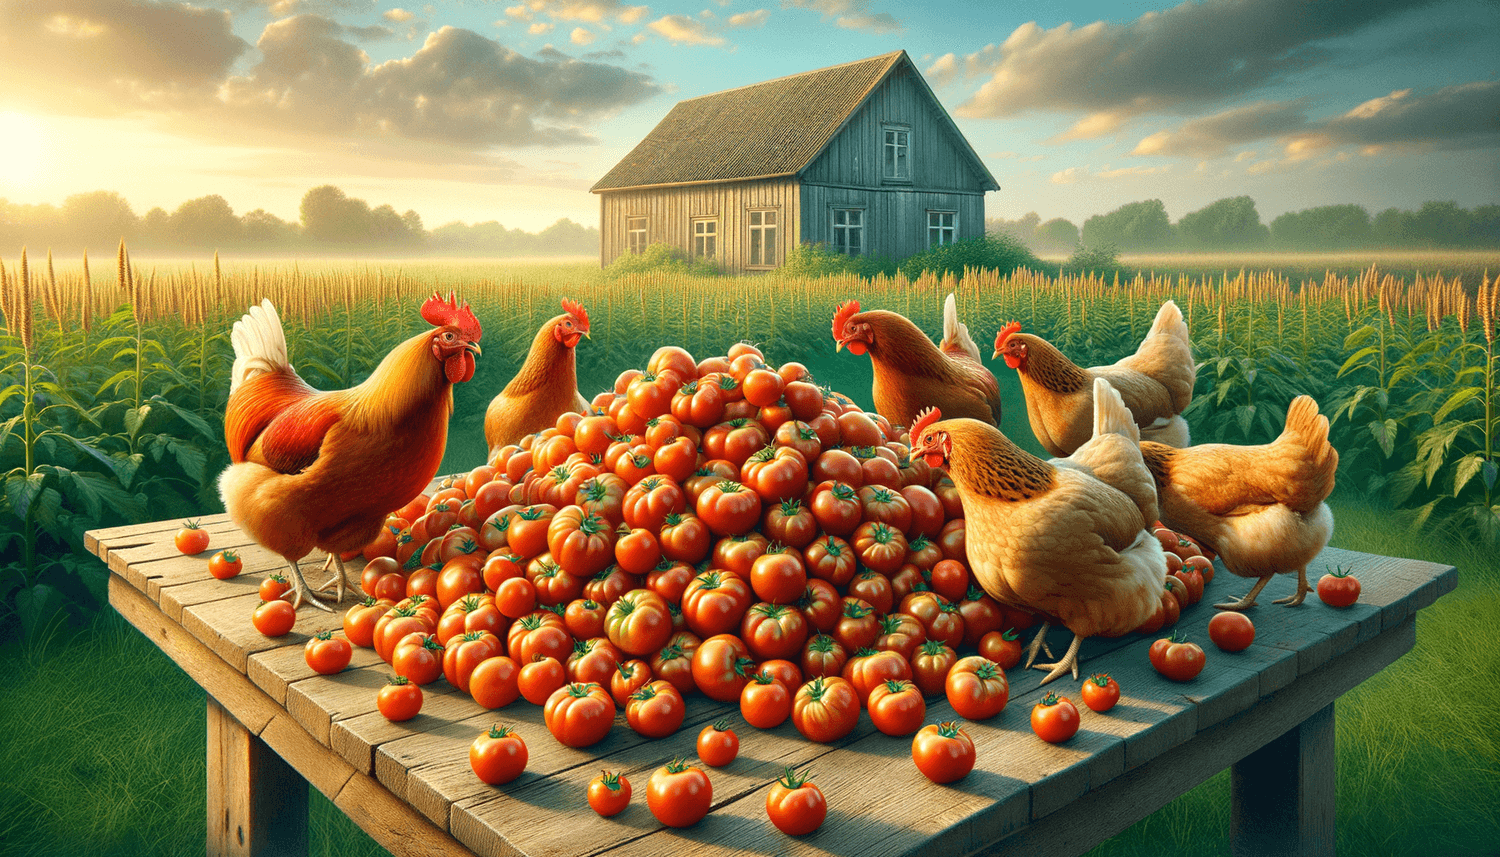 Can Chickens Eat Ripe Tomatoes?